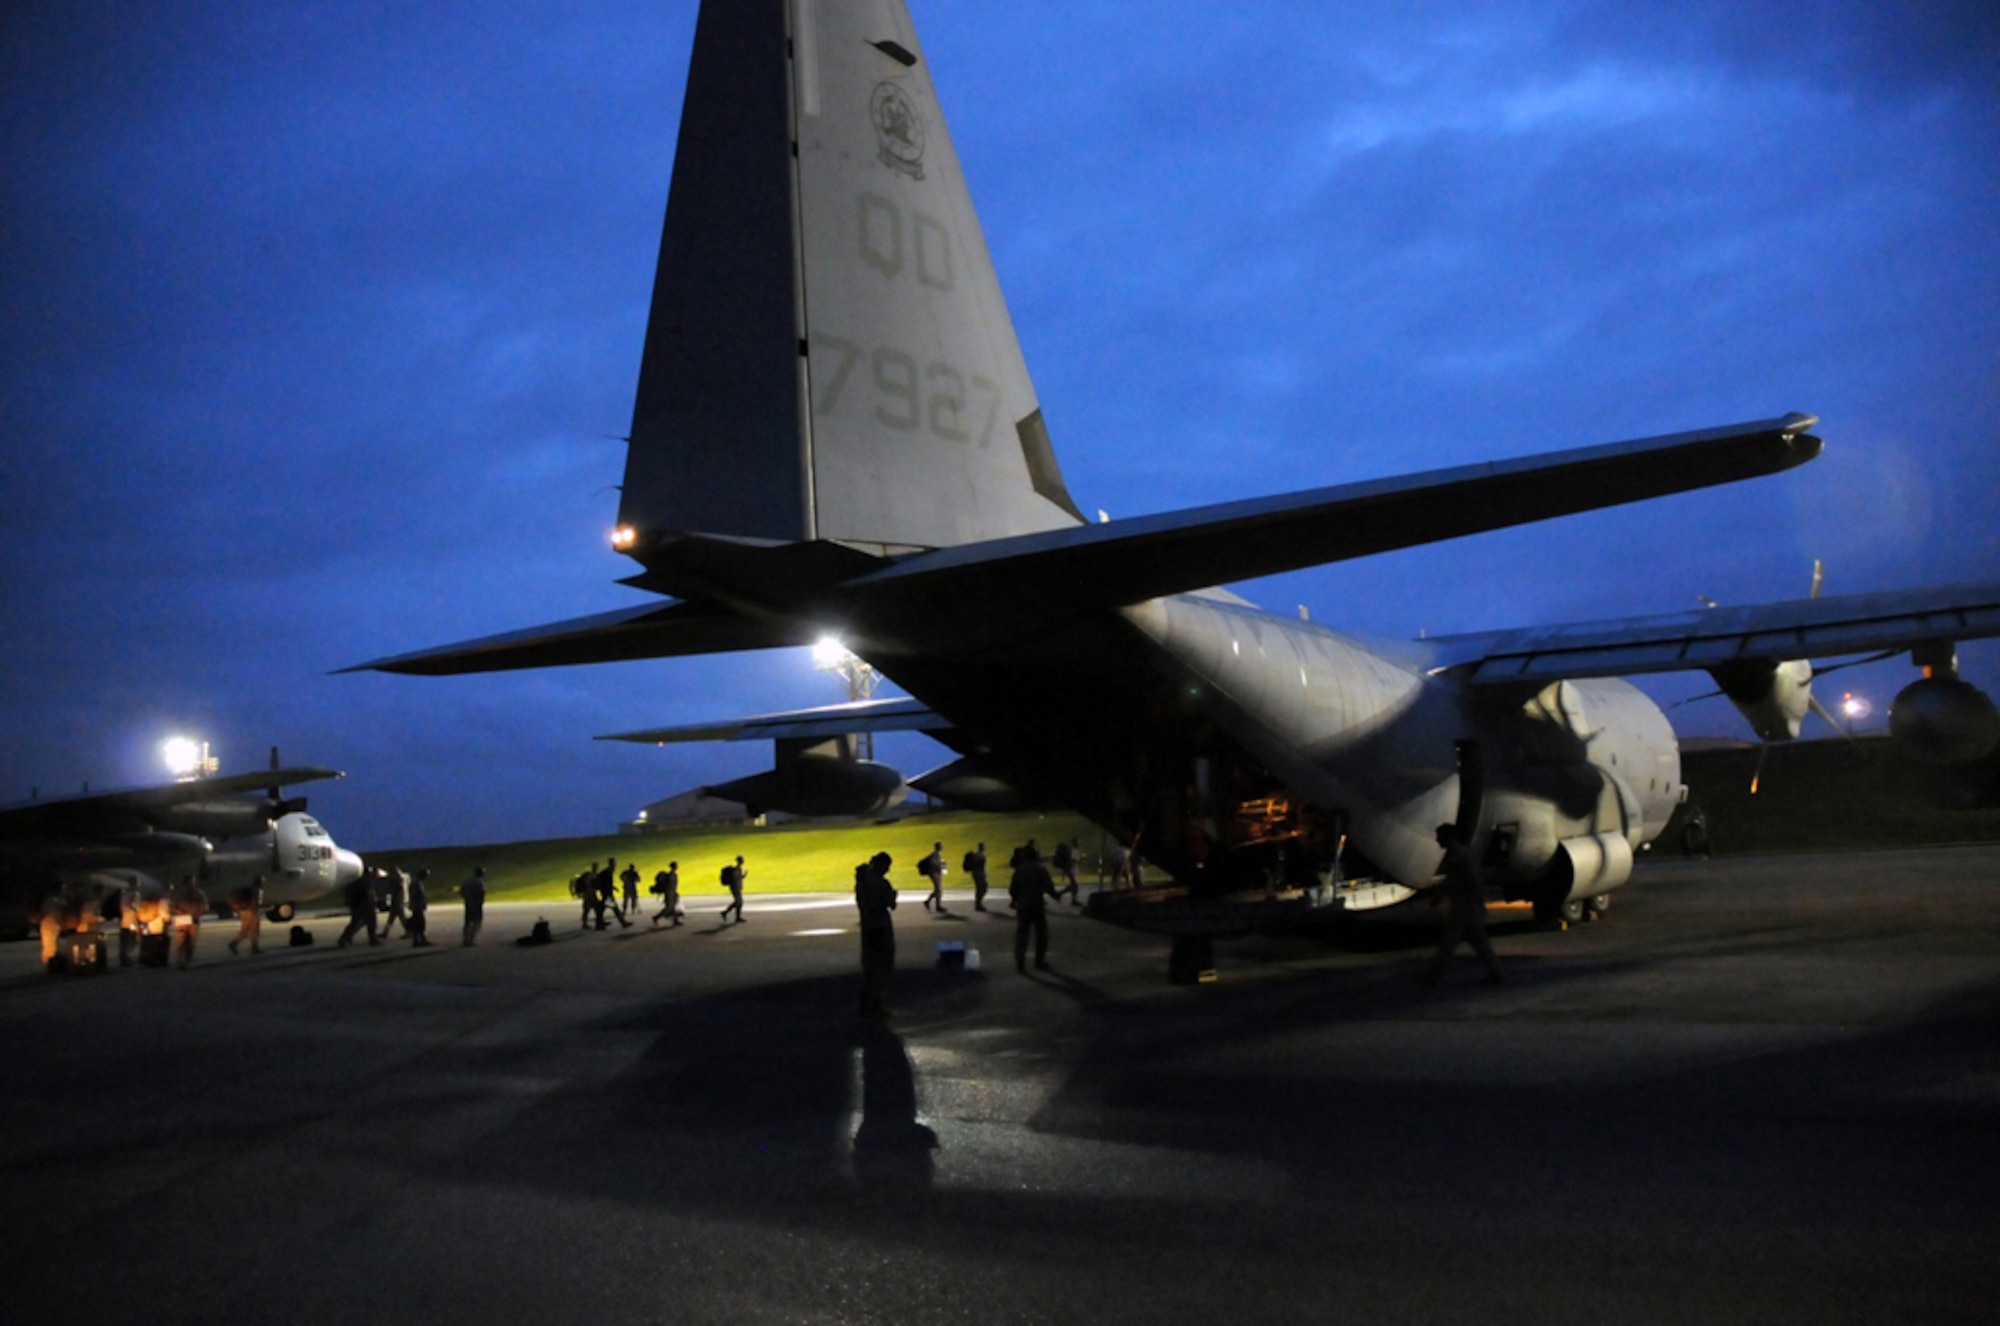 Members of a U.S. Pacific Command Joint Humanitarian Assistance Survey Team load onto a Marine Corps C-130 Hercules at Kadena Air Base, Japan, on April 29, 2015. The team deployed to Nepal to assist earthquake relief efforts. Kadena’s Airmen worked through the night to load the team’s 20-plus members and gear for the departure. (U.S. Air Force photo/2nd Lt. Erik Anthony)